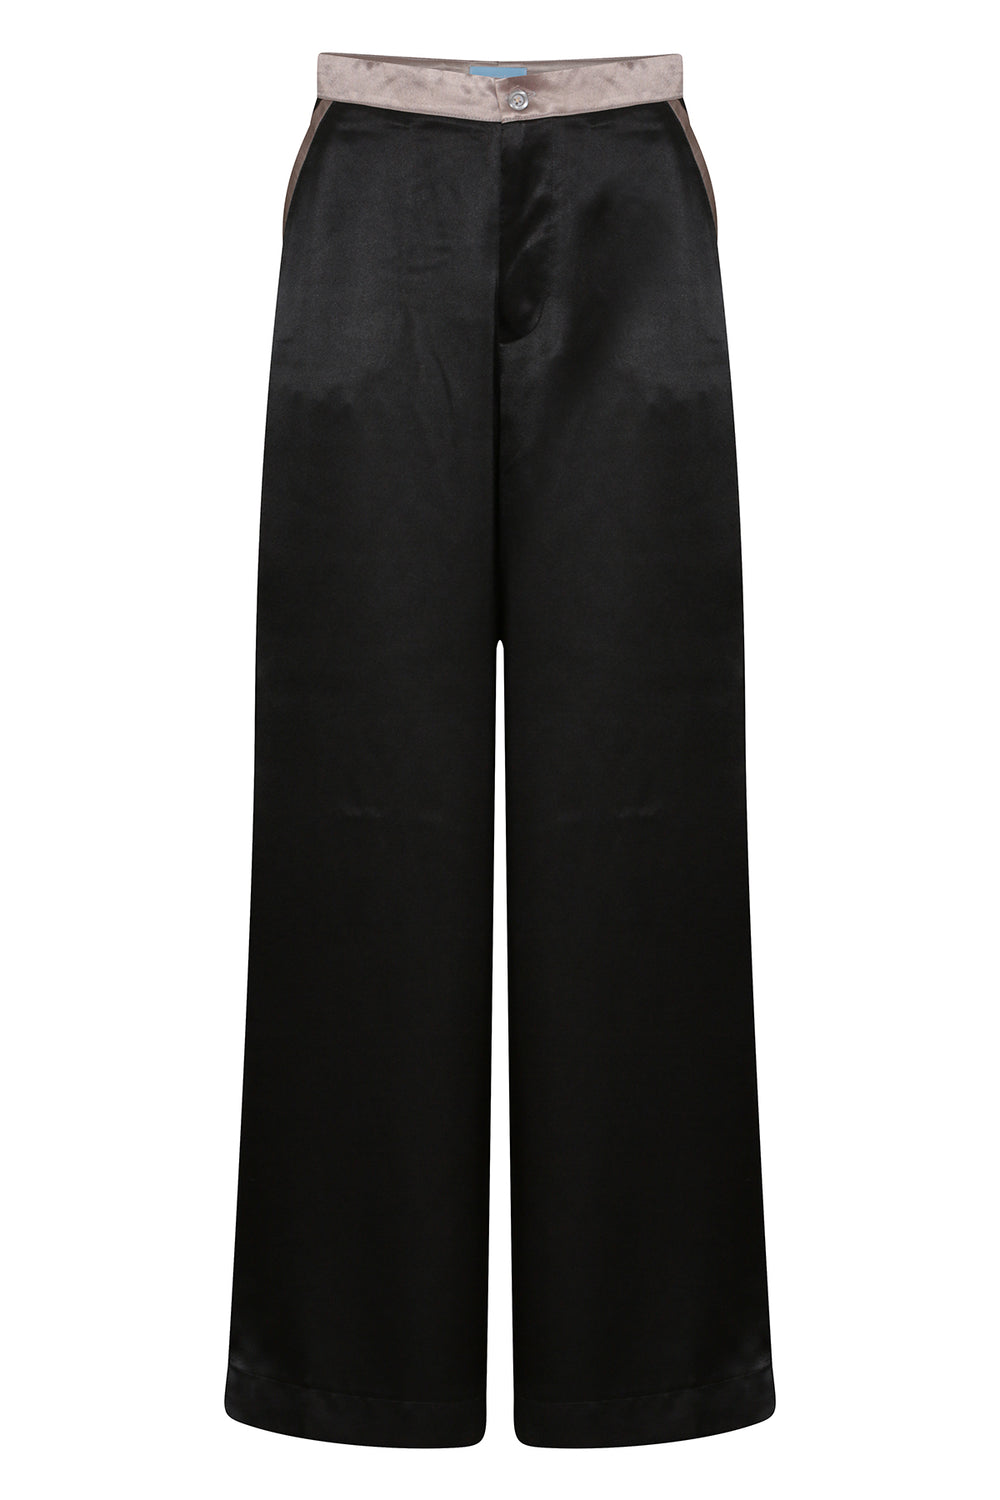 Black wide-leg silk trousers with silver trimming